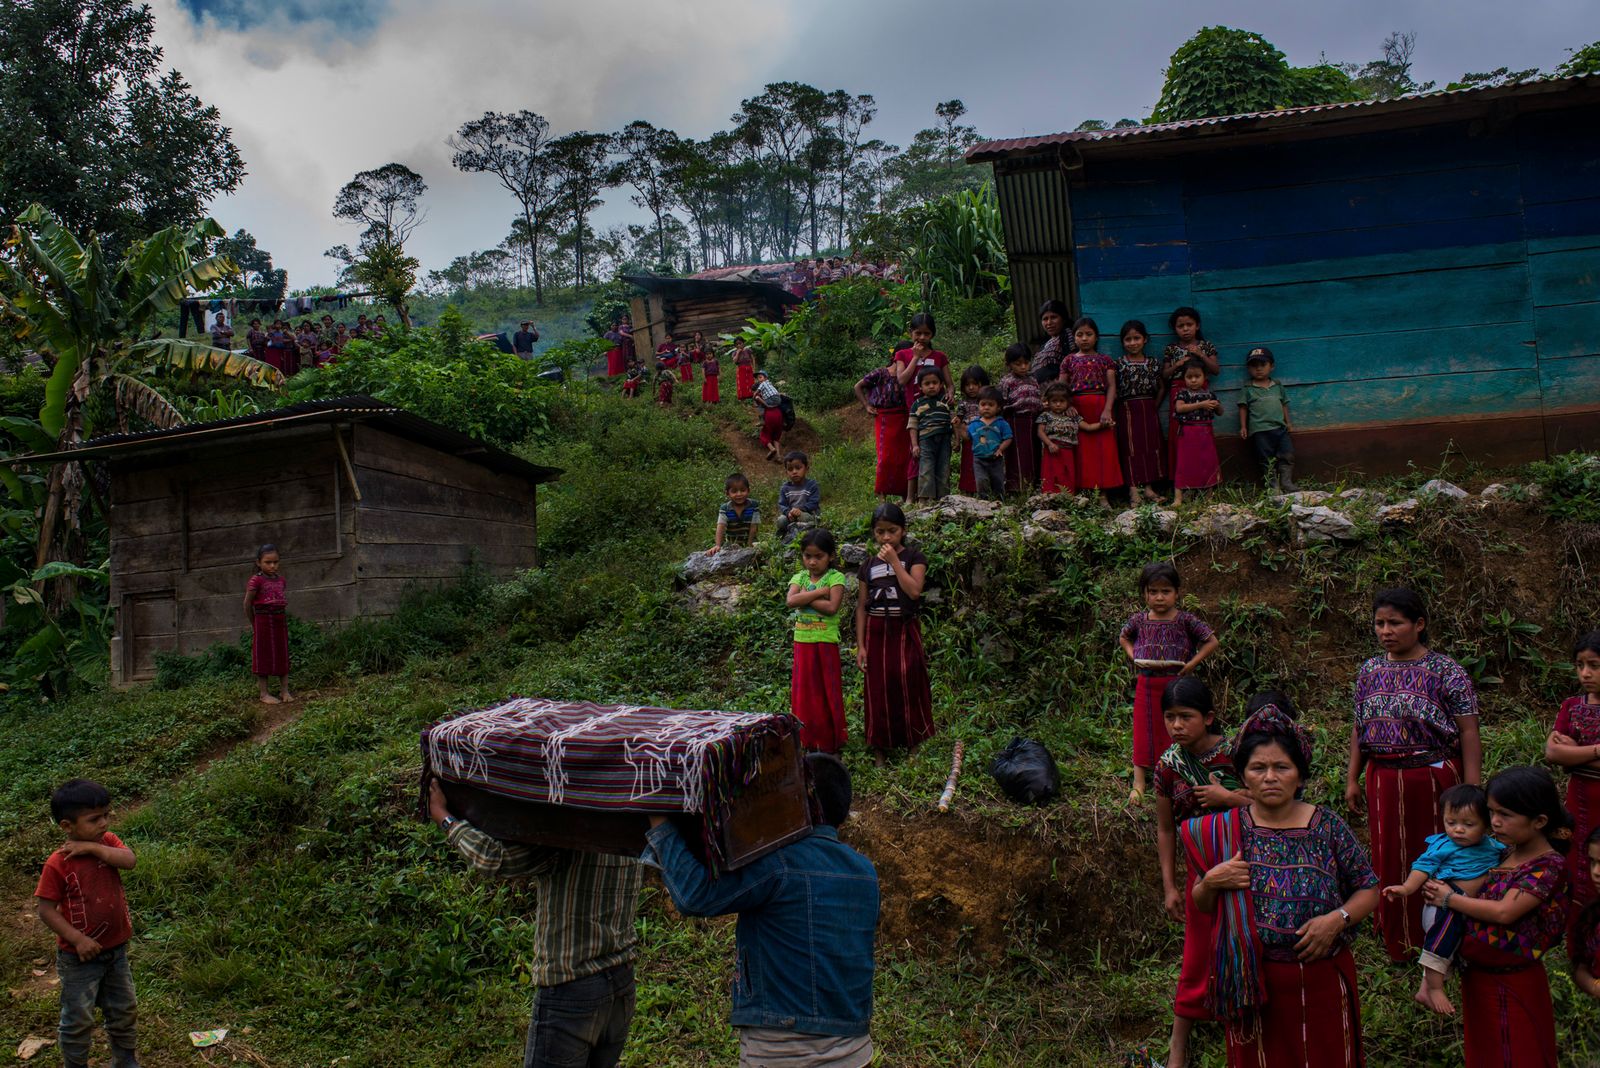 © Daniele Volpe - Image from the Ixil Genocide photography project